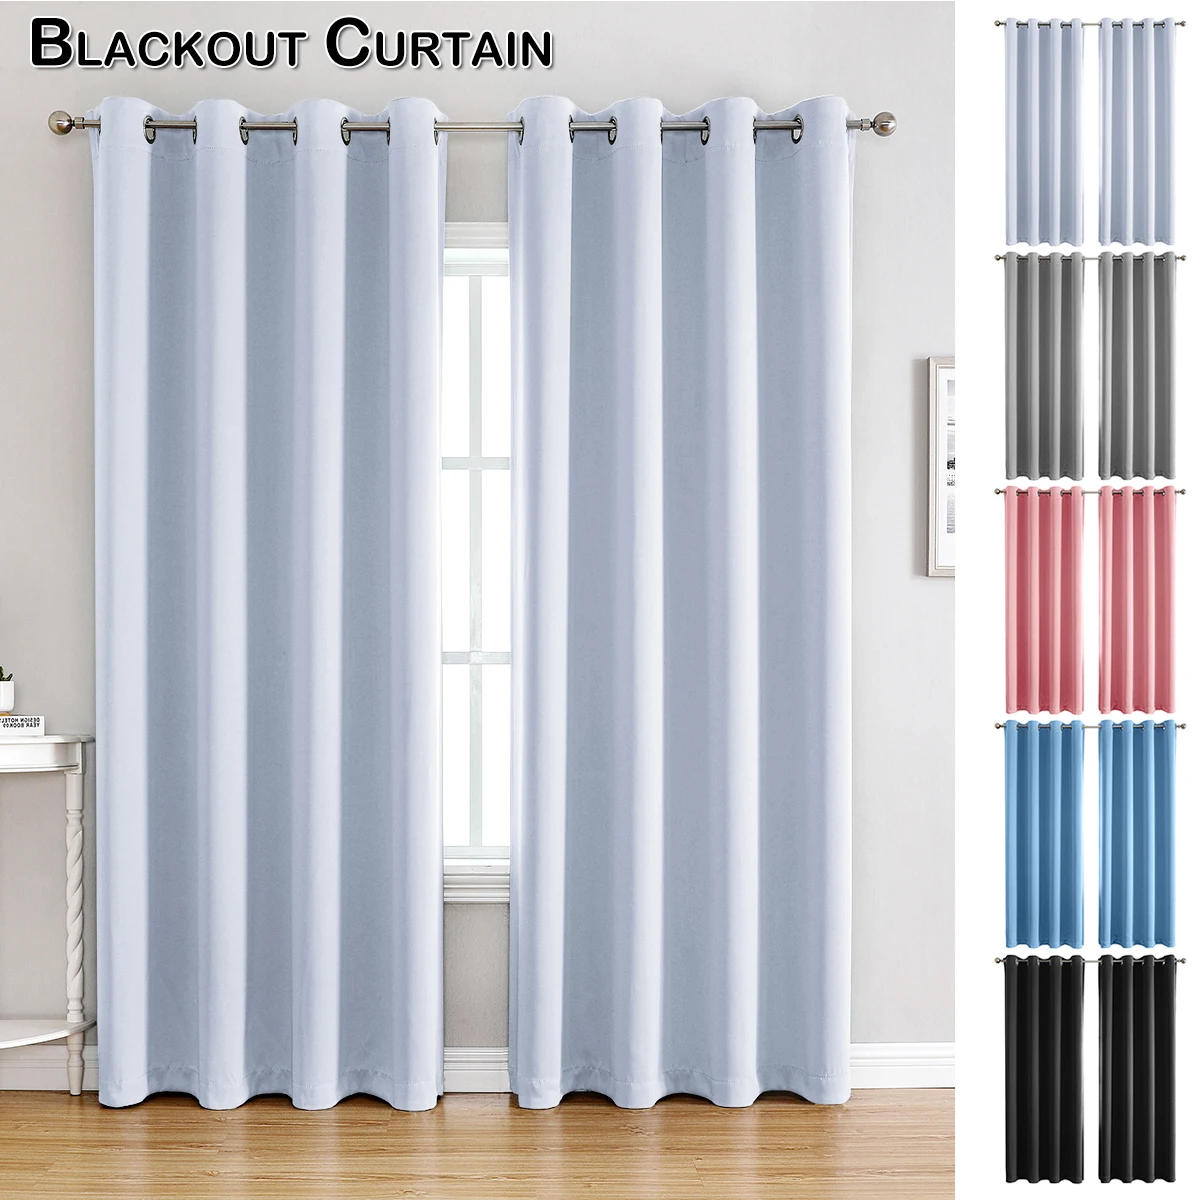 

Thermal Insulated Drapes Bedroom Darkening Blackout Curtain Tiebacks Grommet Window Curtains for Living Room Solid Blinds D30